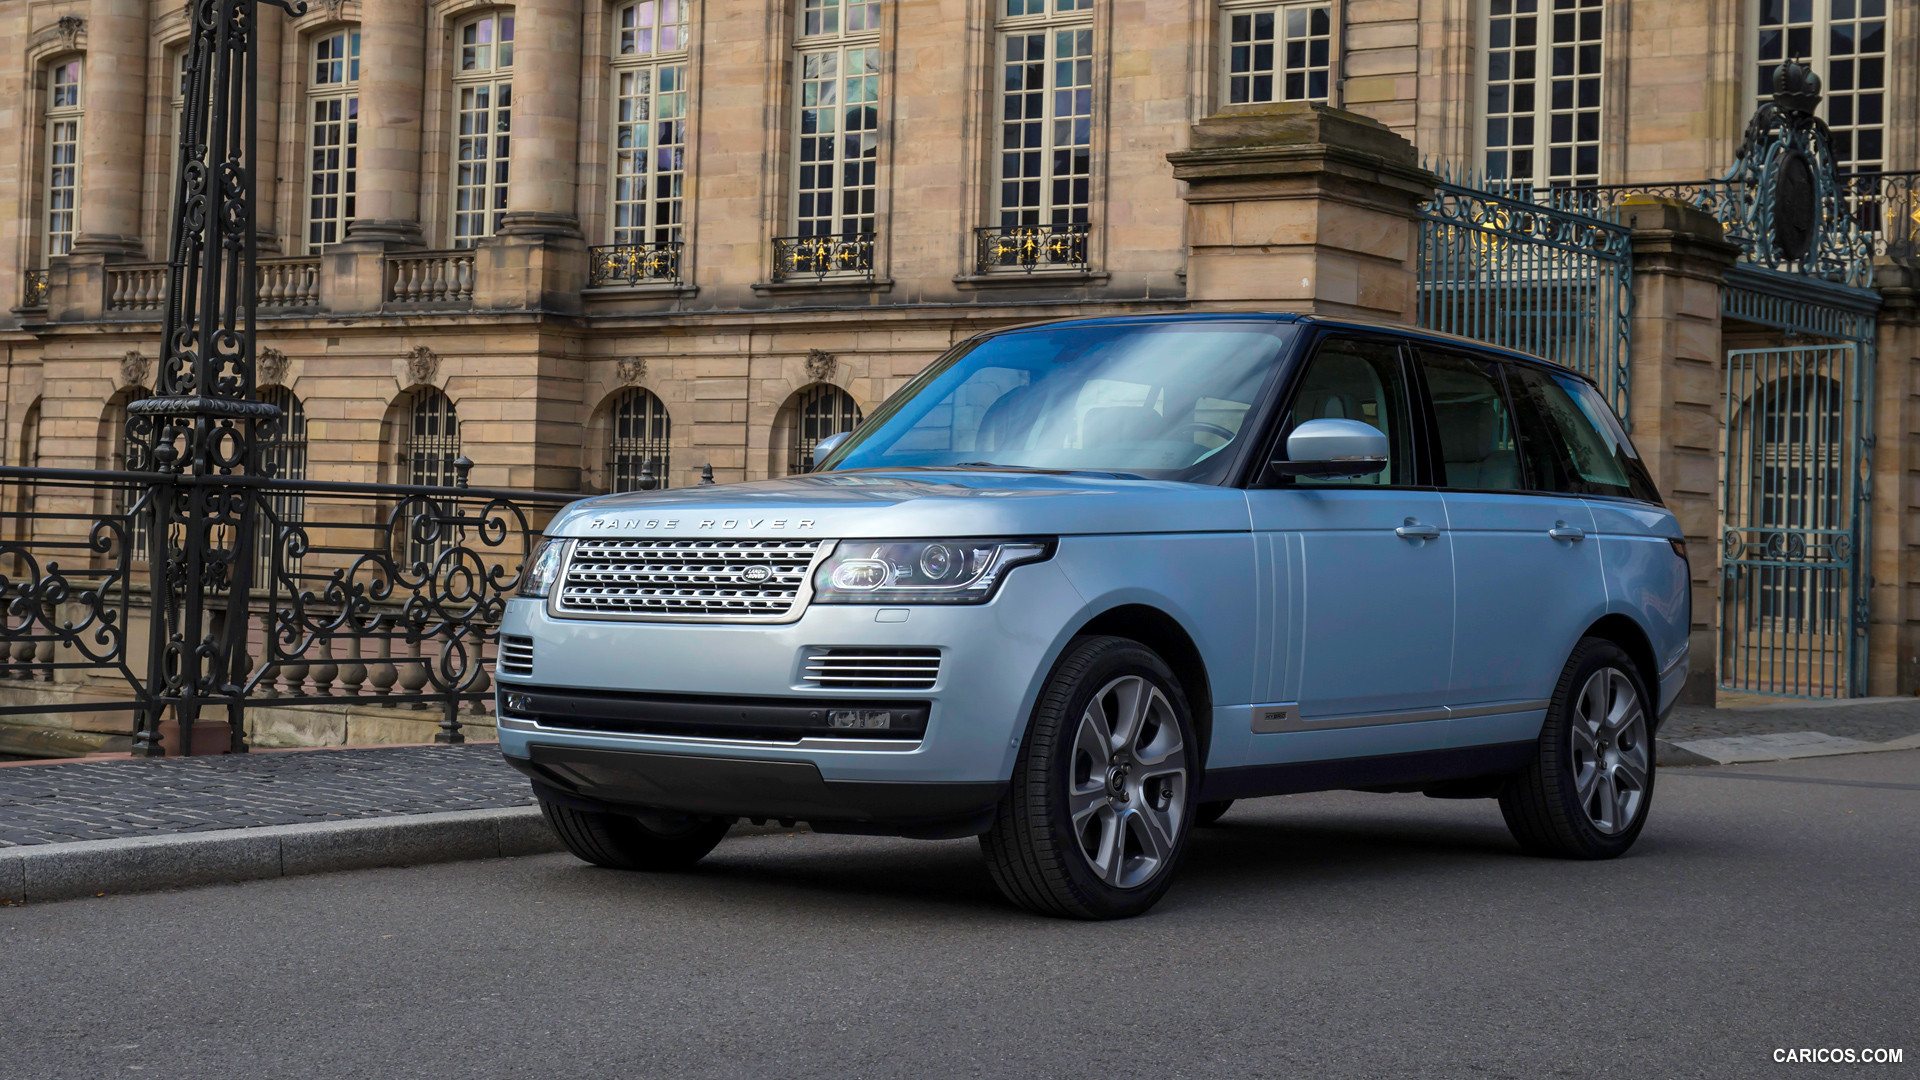 Images of 2015 Land Rover Range Rover Hybrid | 1920x1080